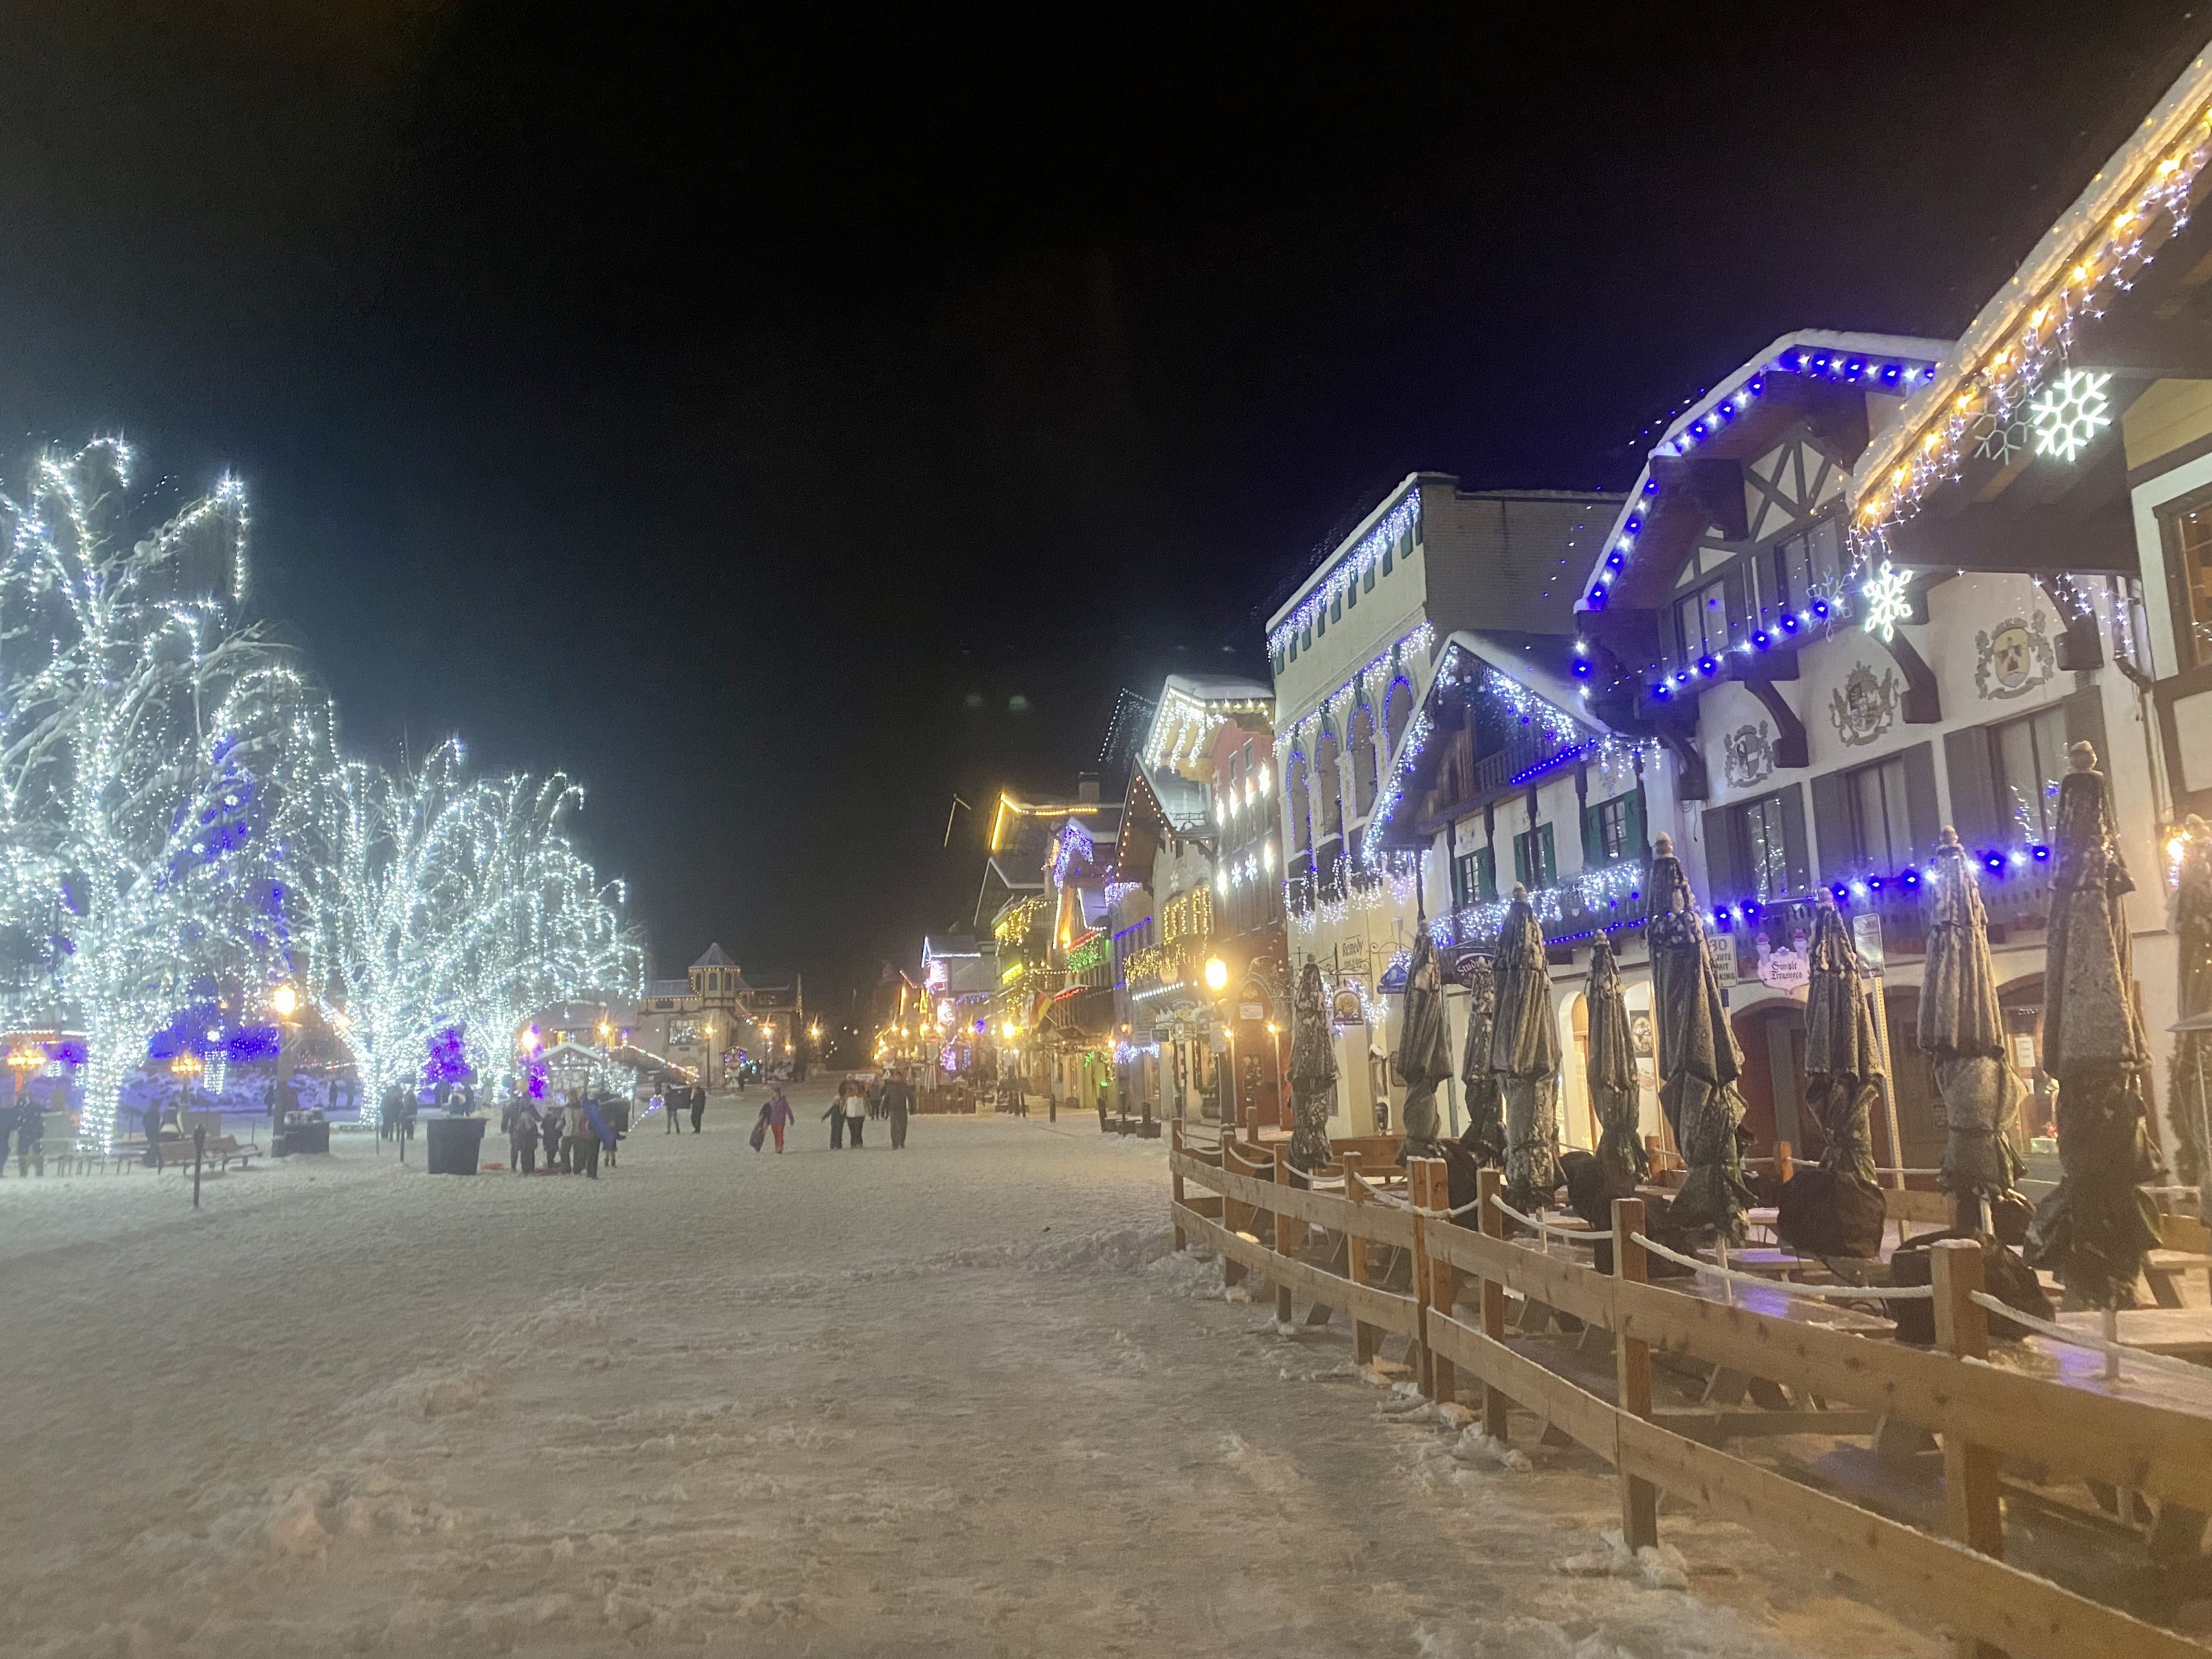 A snowy street with Bavarian-style buildings lining it, all lit with colorful lights.